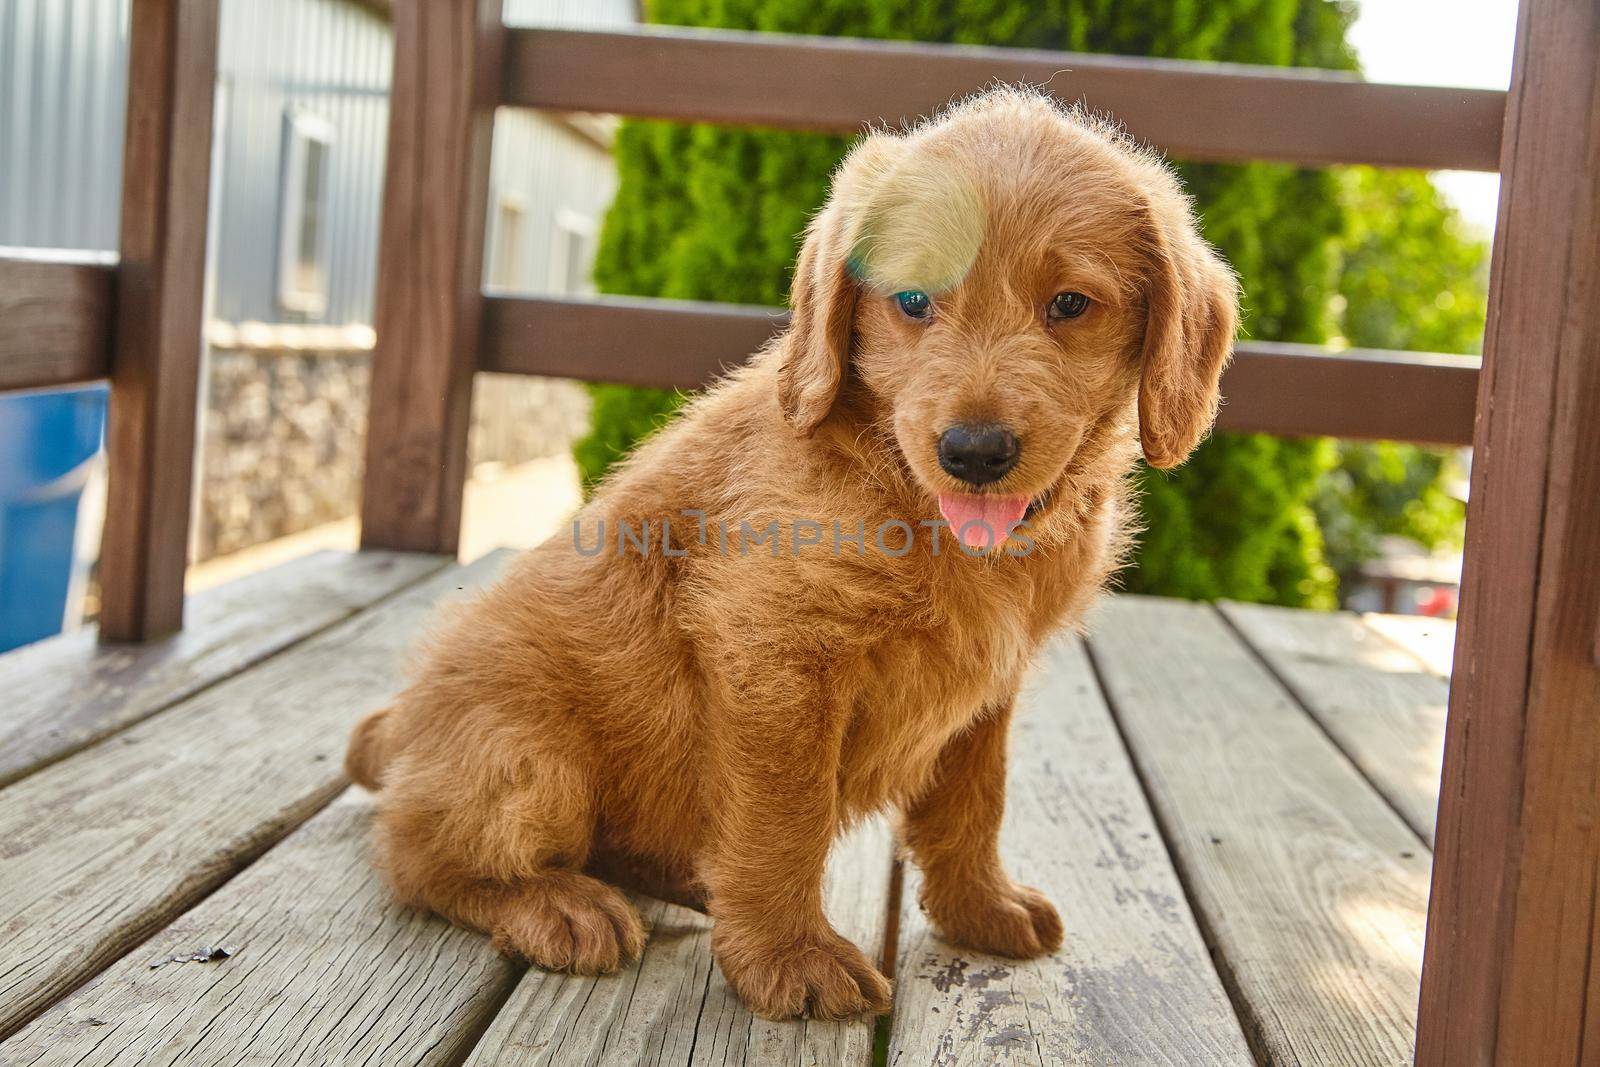 Image of Adorable Labradoodle puppy with tongue out resting on wood furniture